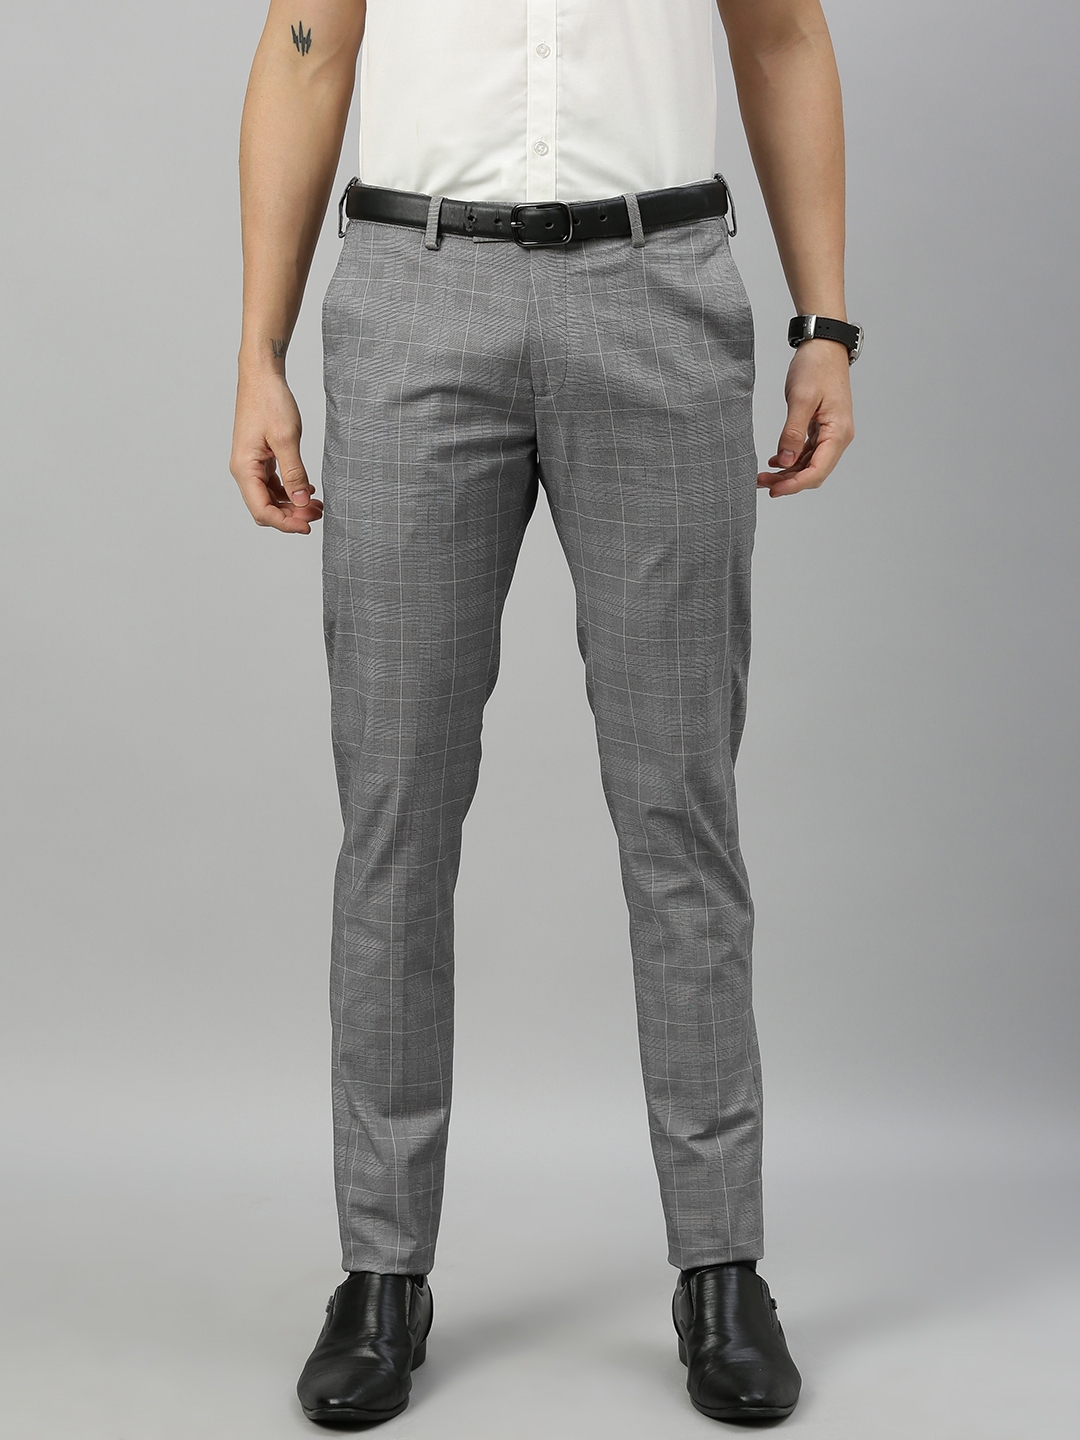 Buy U.S. Polo Assn. Men Grey & White Slim Fit Checked Formal Trousers ...